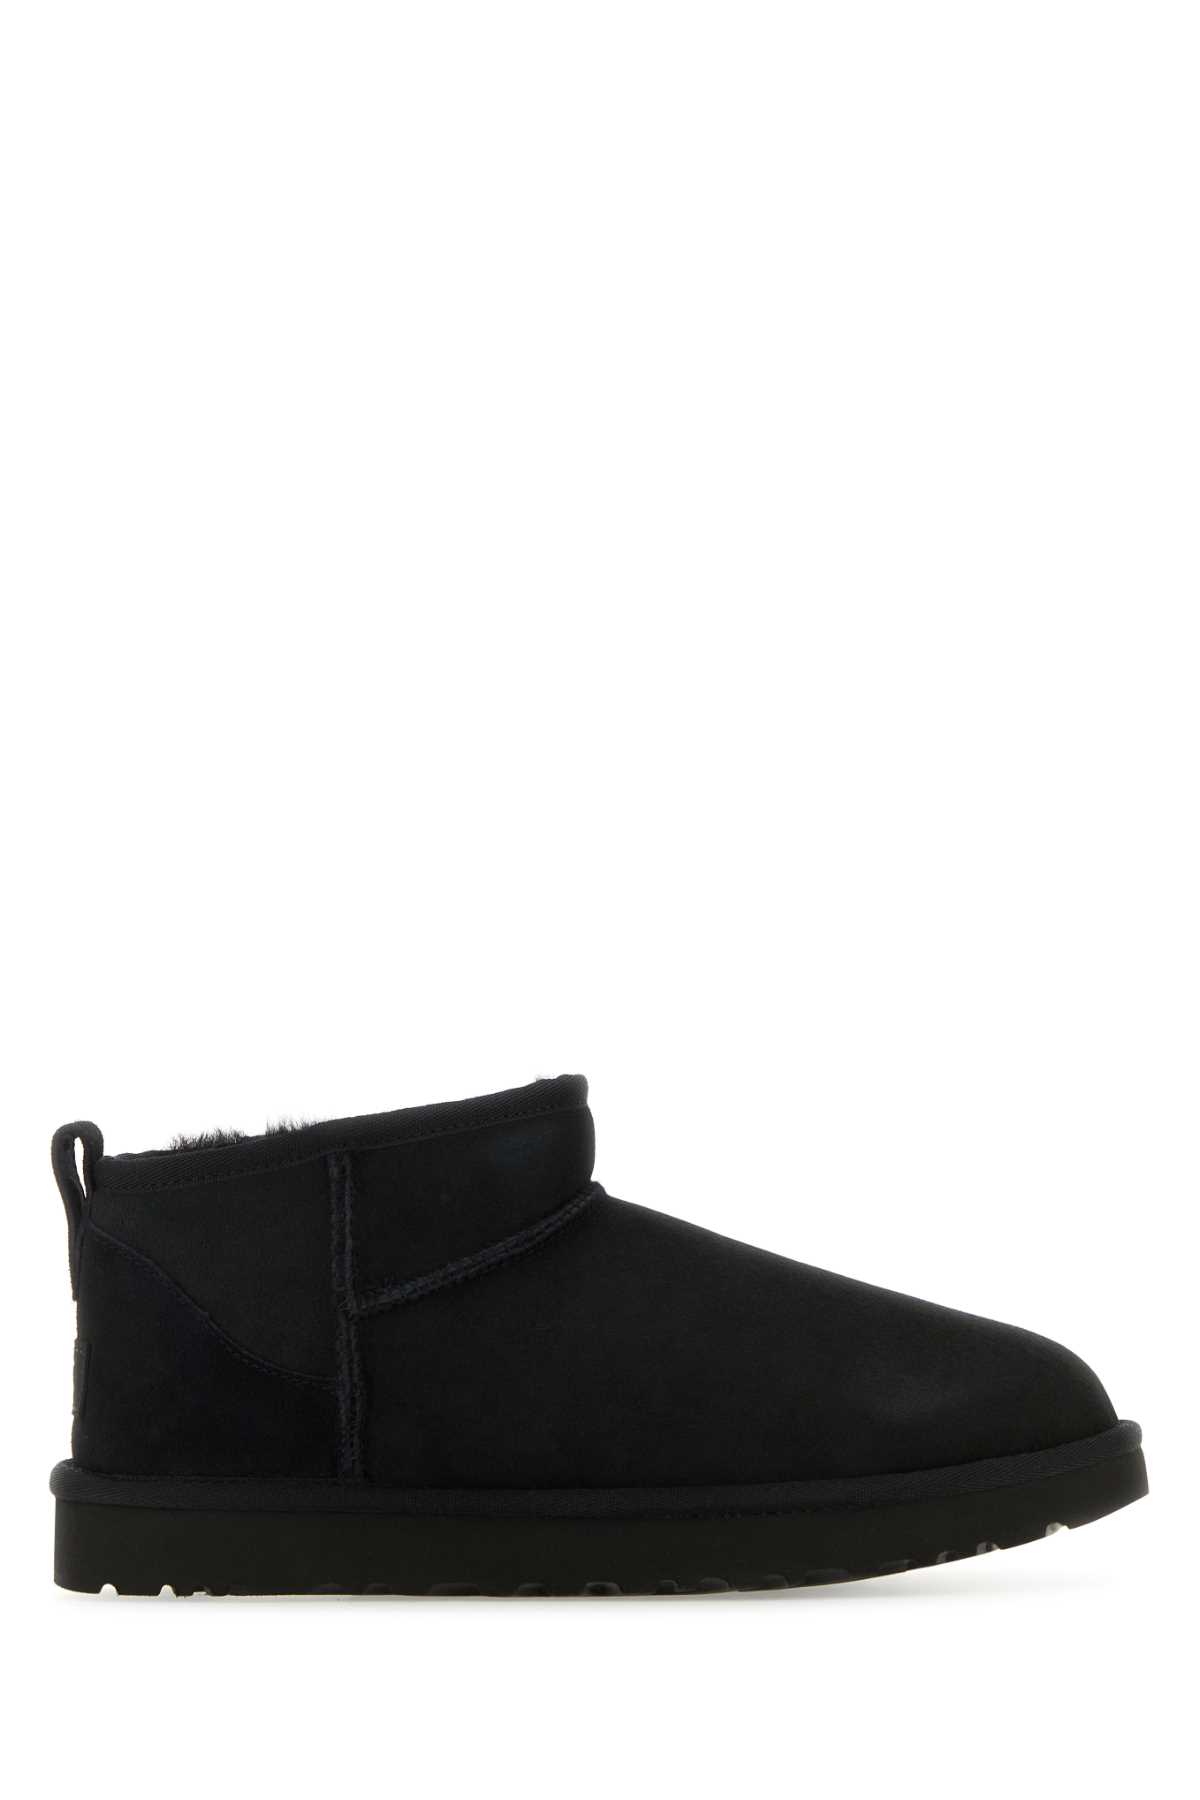 UGG Black Suede Classic Ultra Mini Ankle Boots